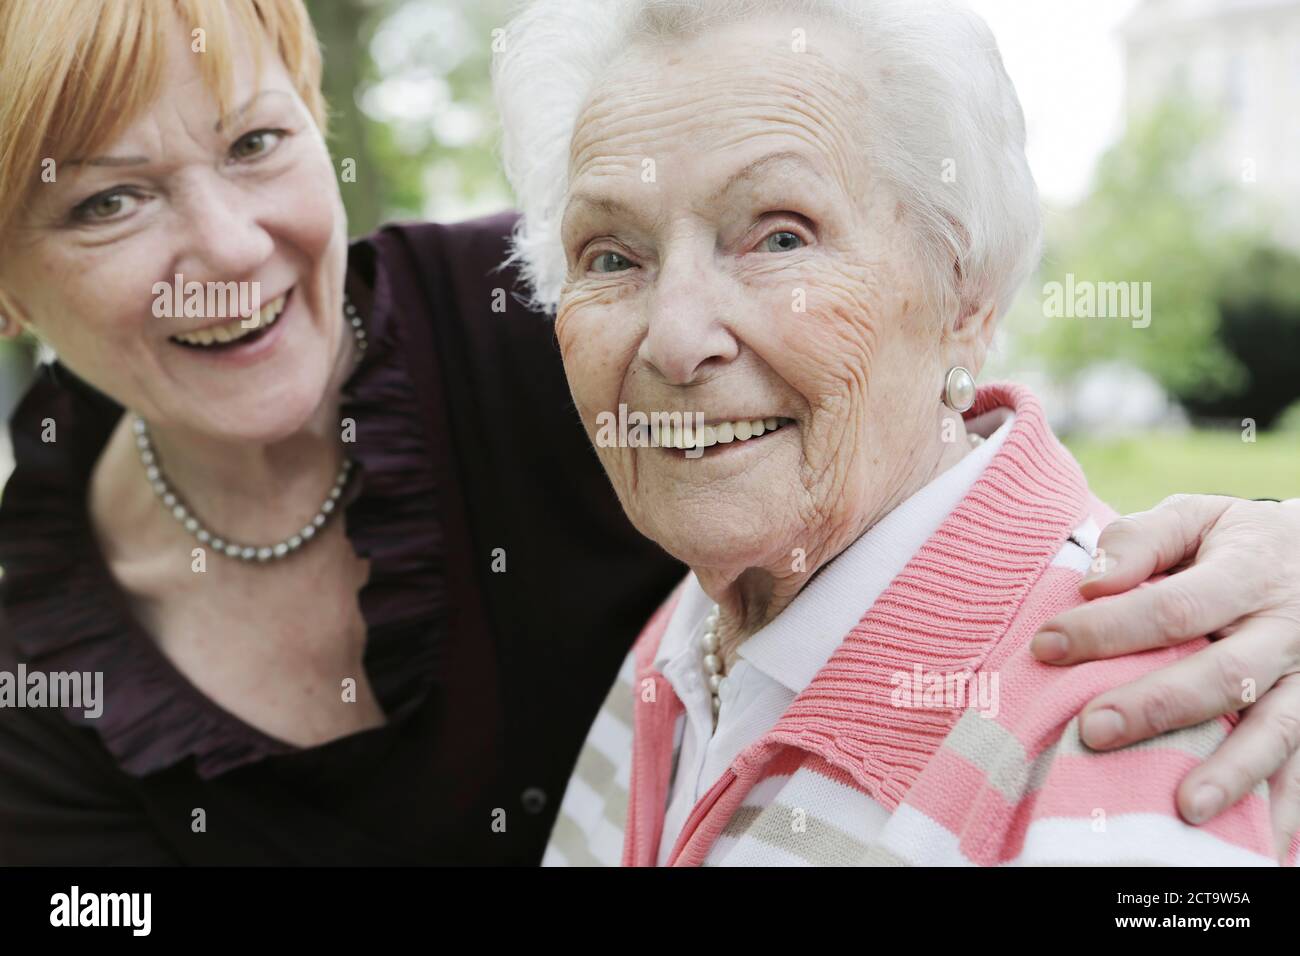 Germany, North Rhine Westphalia, Cologne, Portrait of senior woman and mature woman, smiling Stock Photo